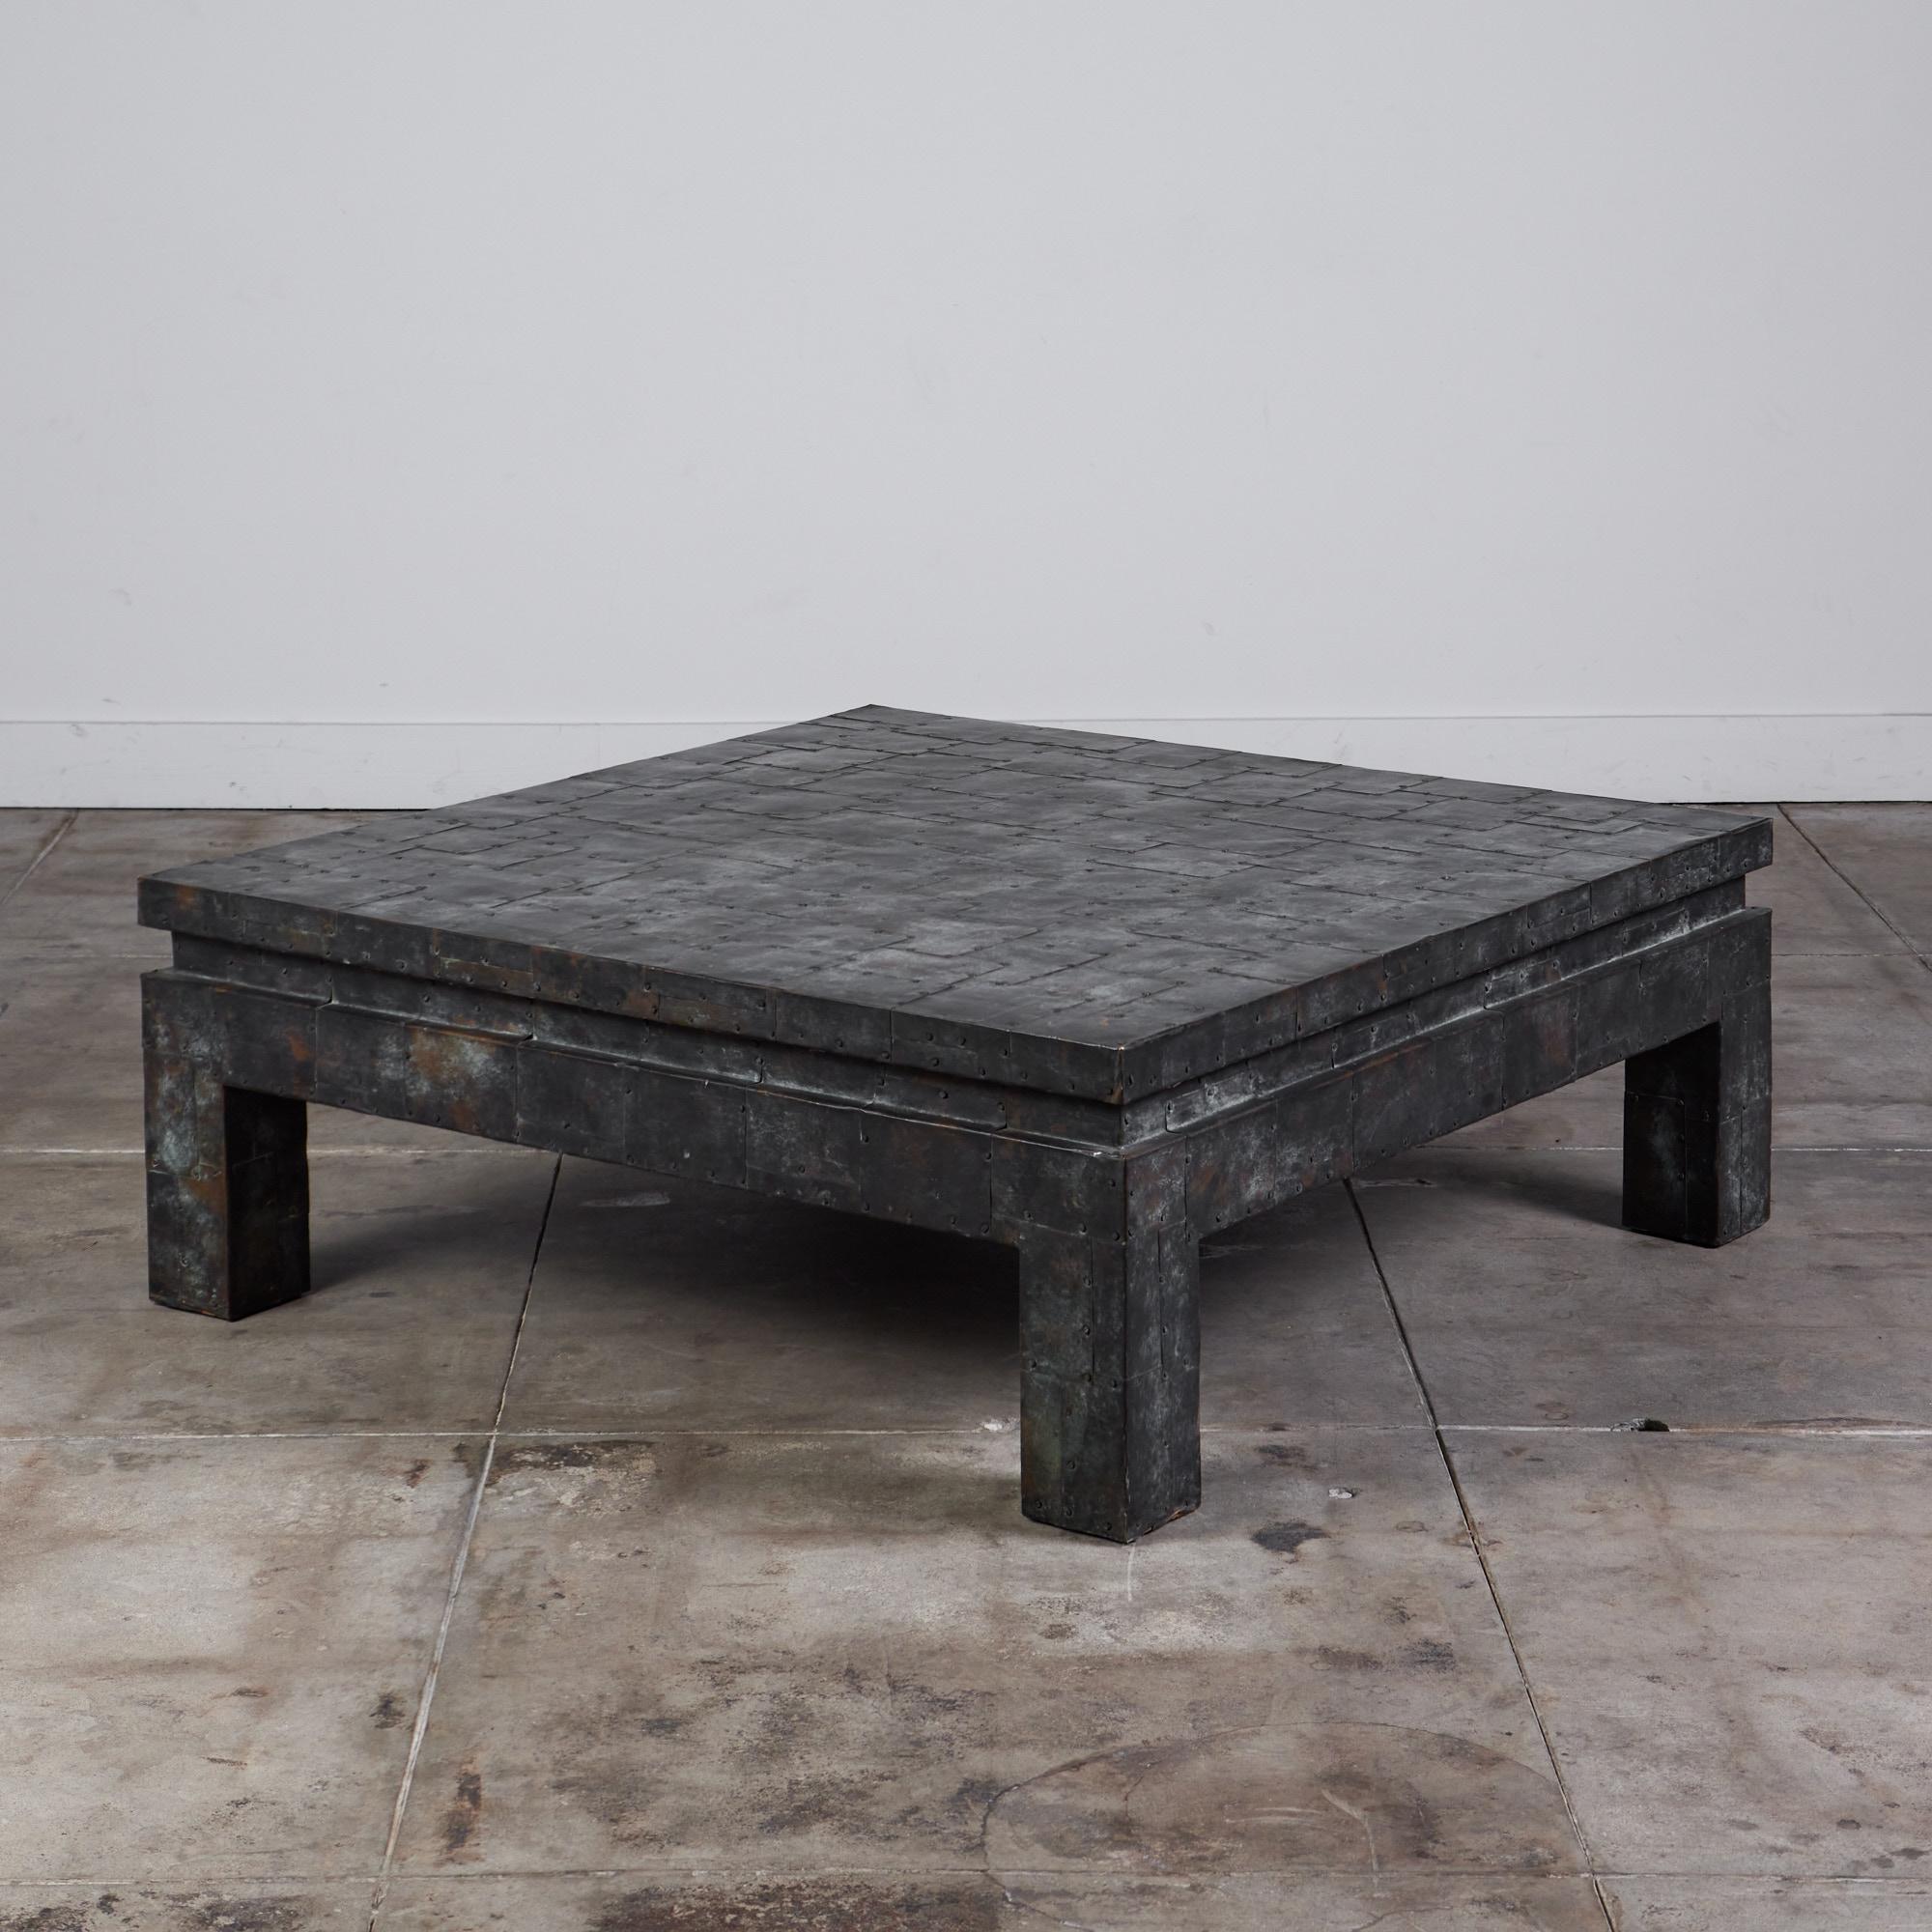 Square coffee table from North Carolina-based furniture company Maitland-Smith. The table has a wooden frame with block legs and a square body. The surface is covered with meticulously laid sheets of oxidized copper for a brutalist patchwork effect.